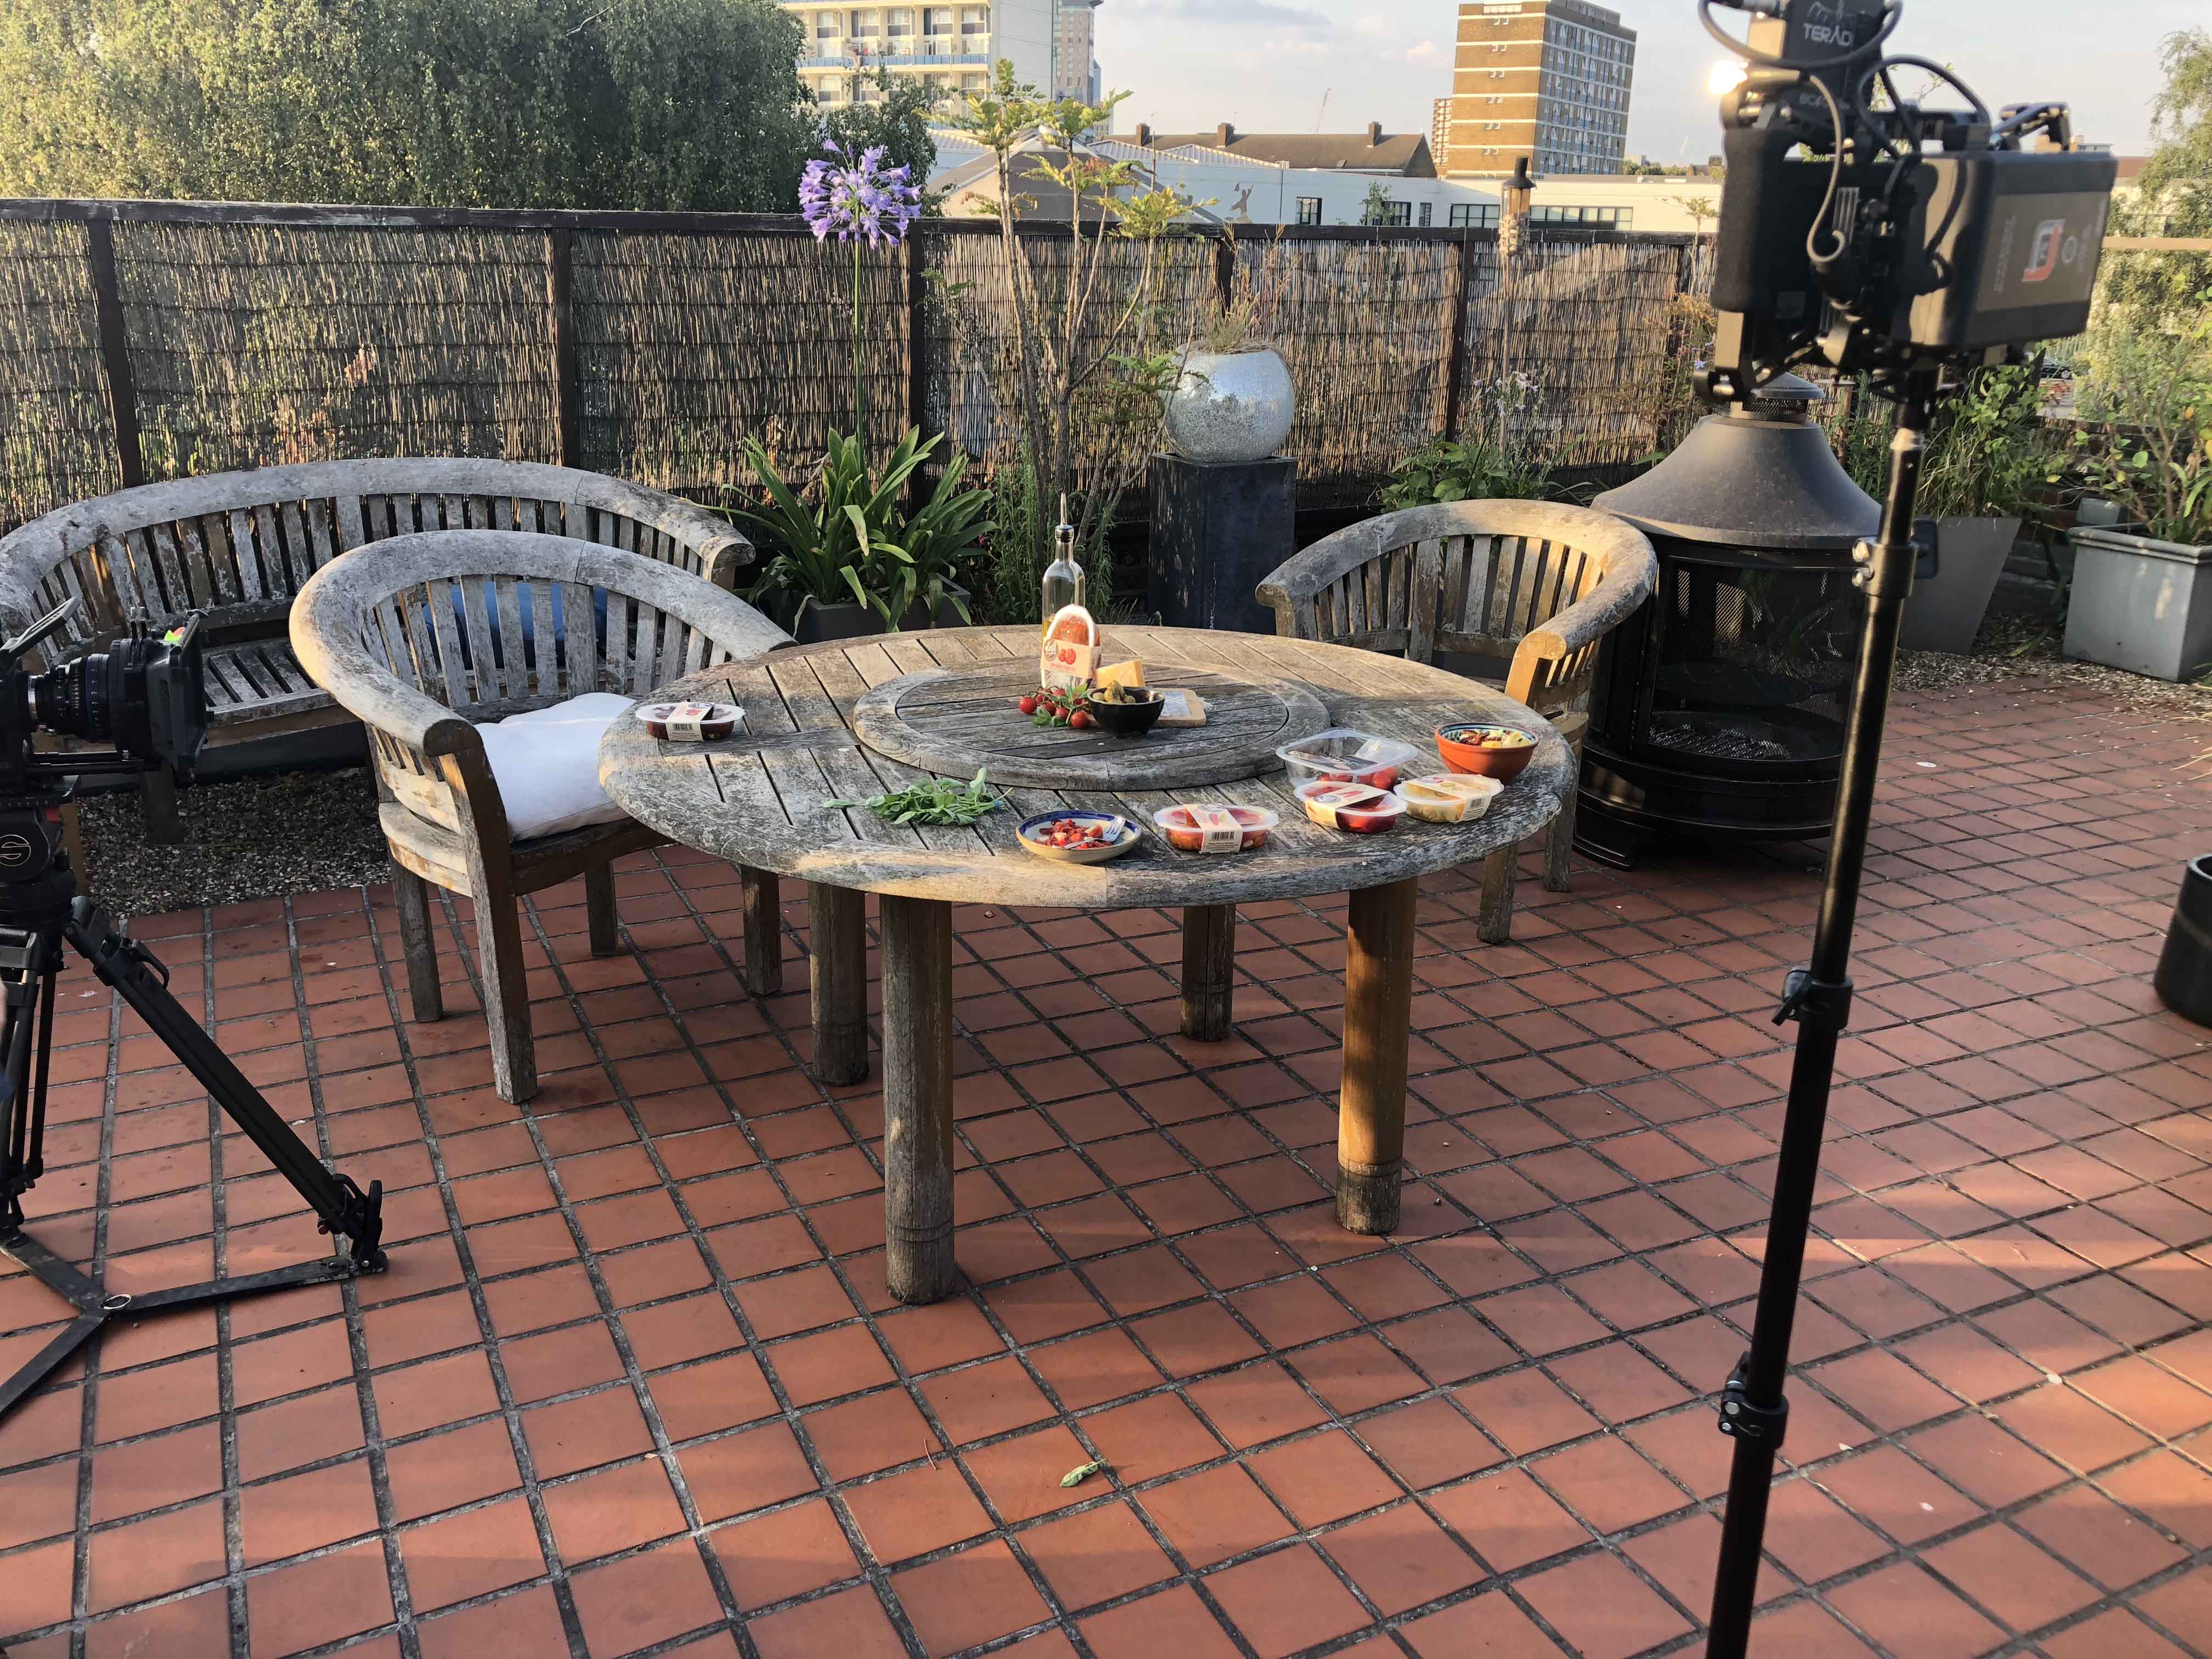 Setting up a photoshoot for the Deli Discoveries Pack